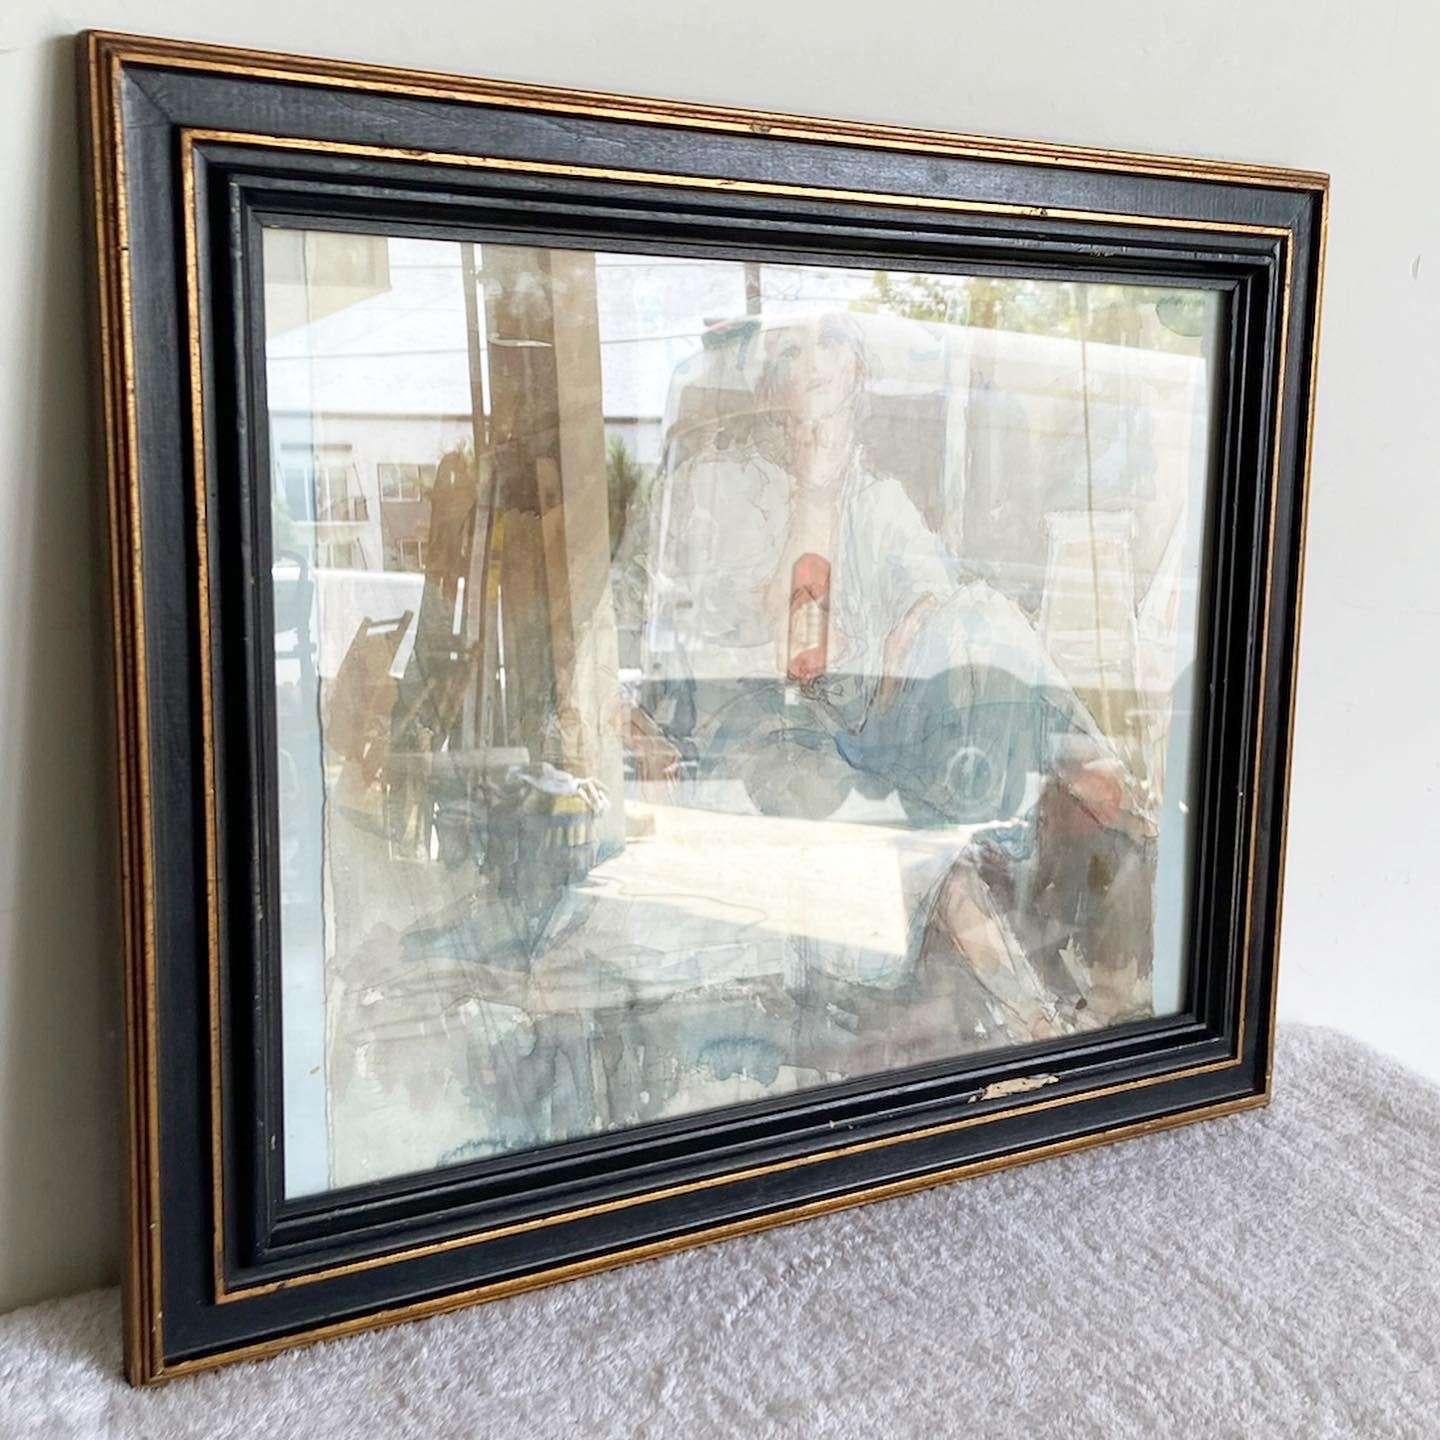 Amazing vintage framed hand painted watercolor painting. Features a portrait of a lady laying with some blue clothes on.